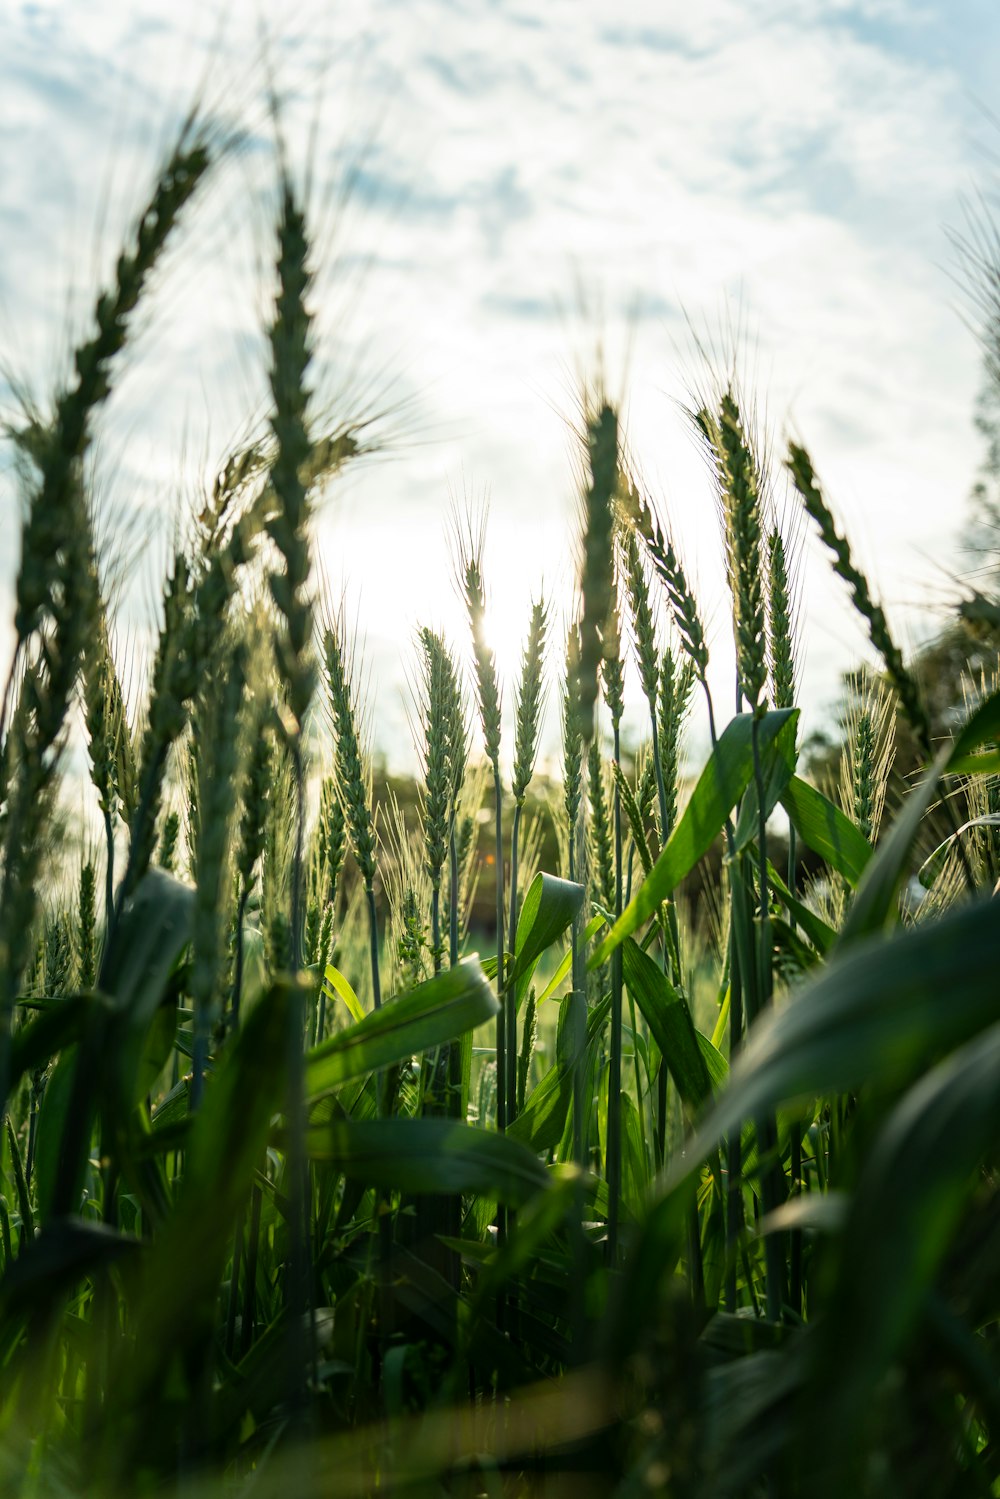 a view of a field of green wheat